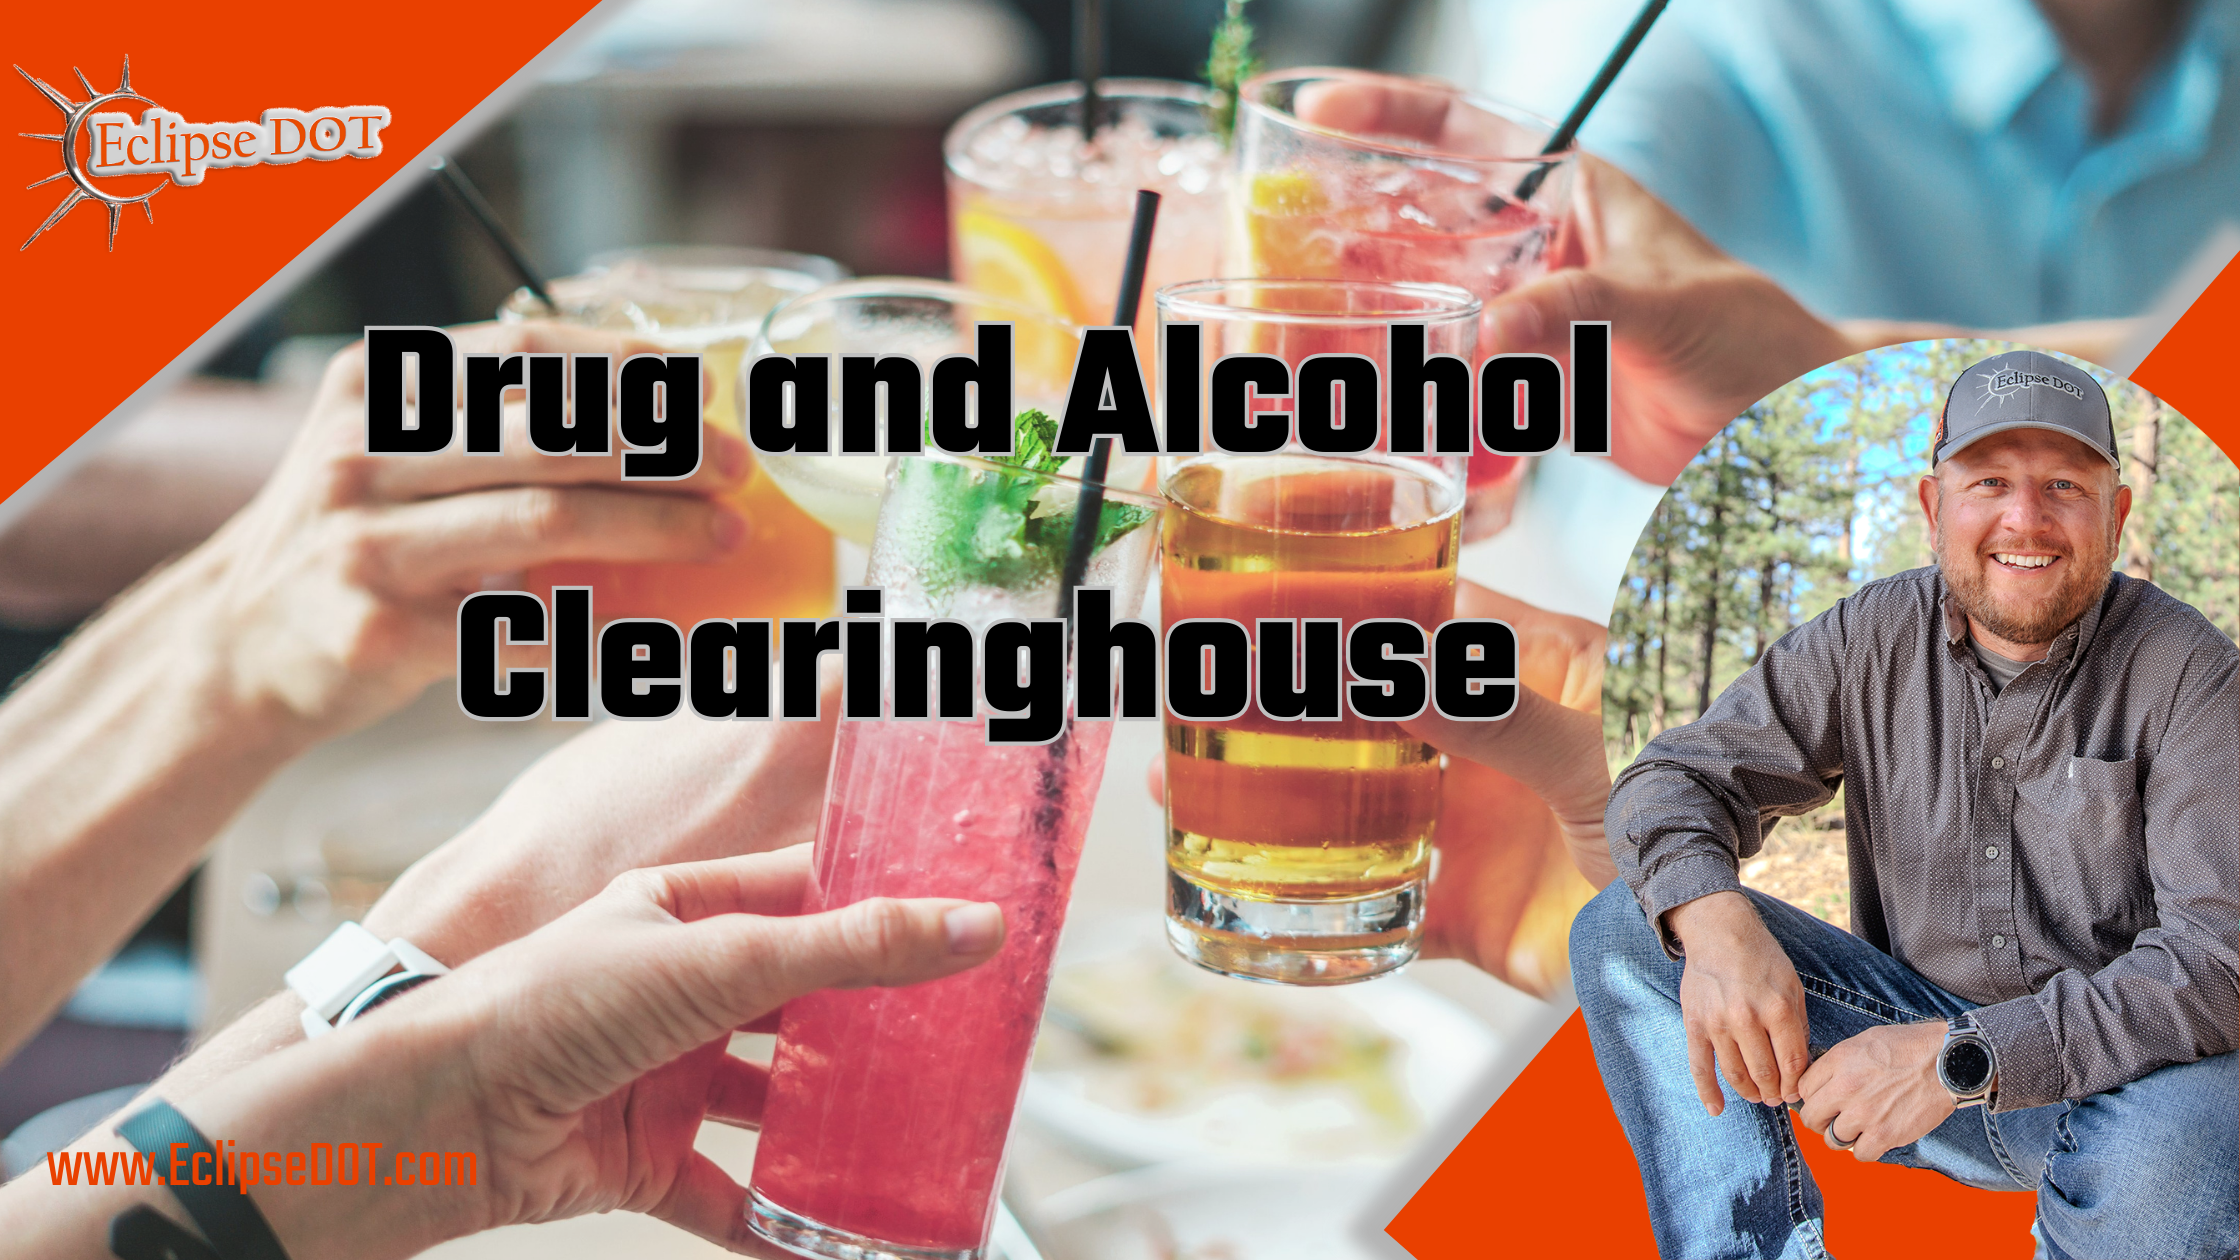 Illustration depicting the Drug and Alcohol Clearinghouse logo